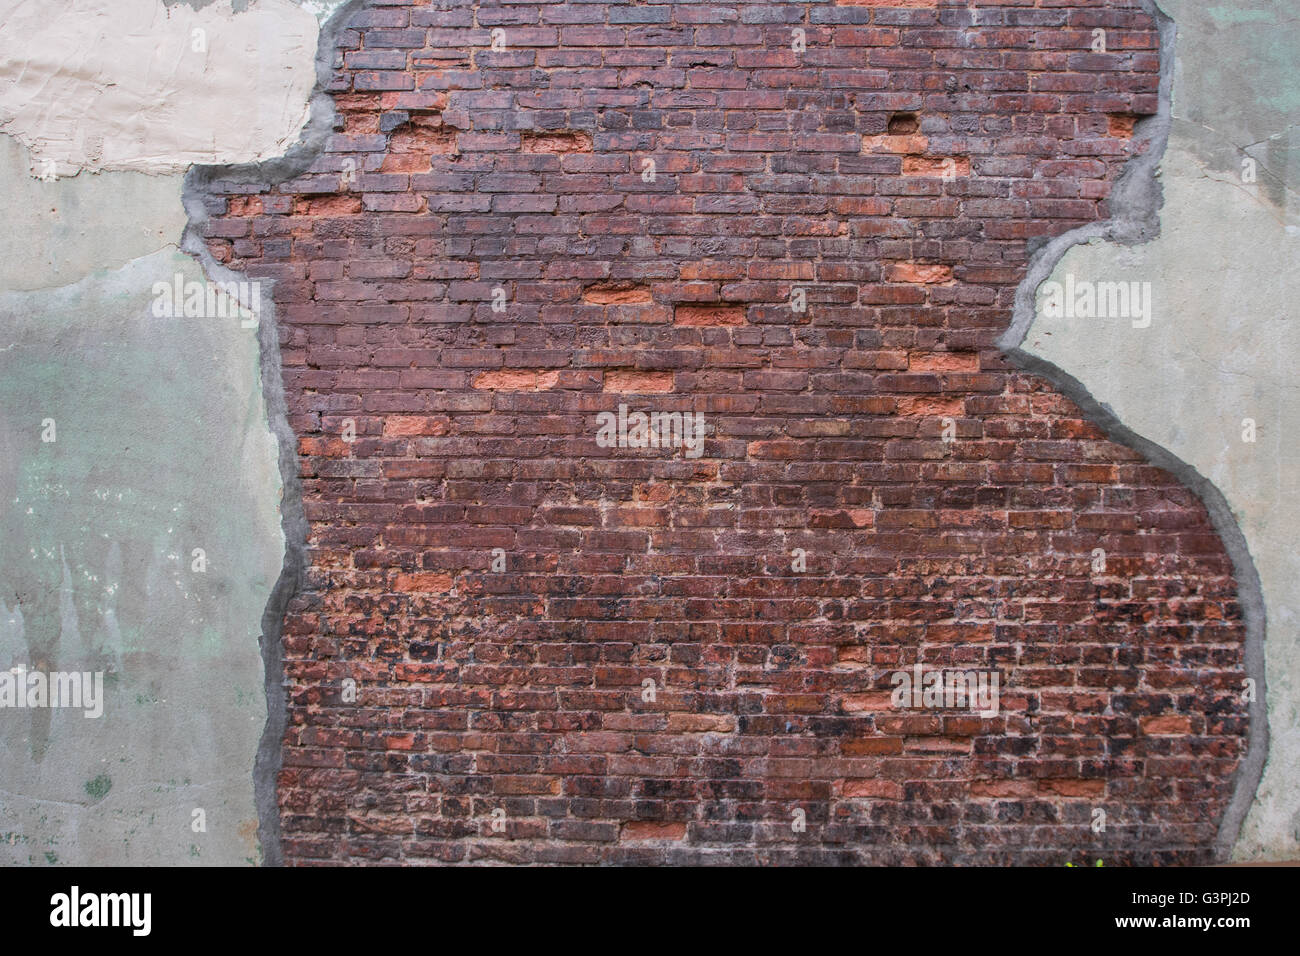 Antique Brick Wall with Worn Grout Skim on Either Side Stock Photo